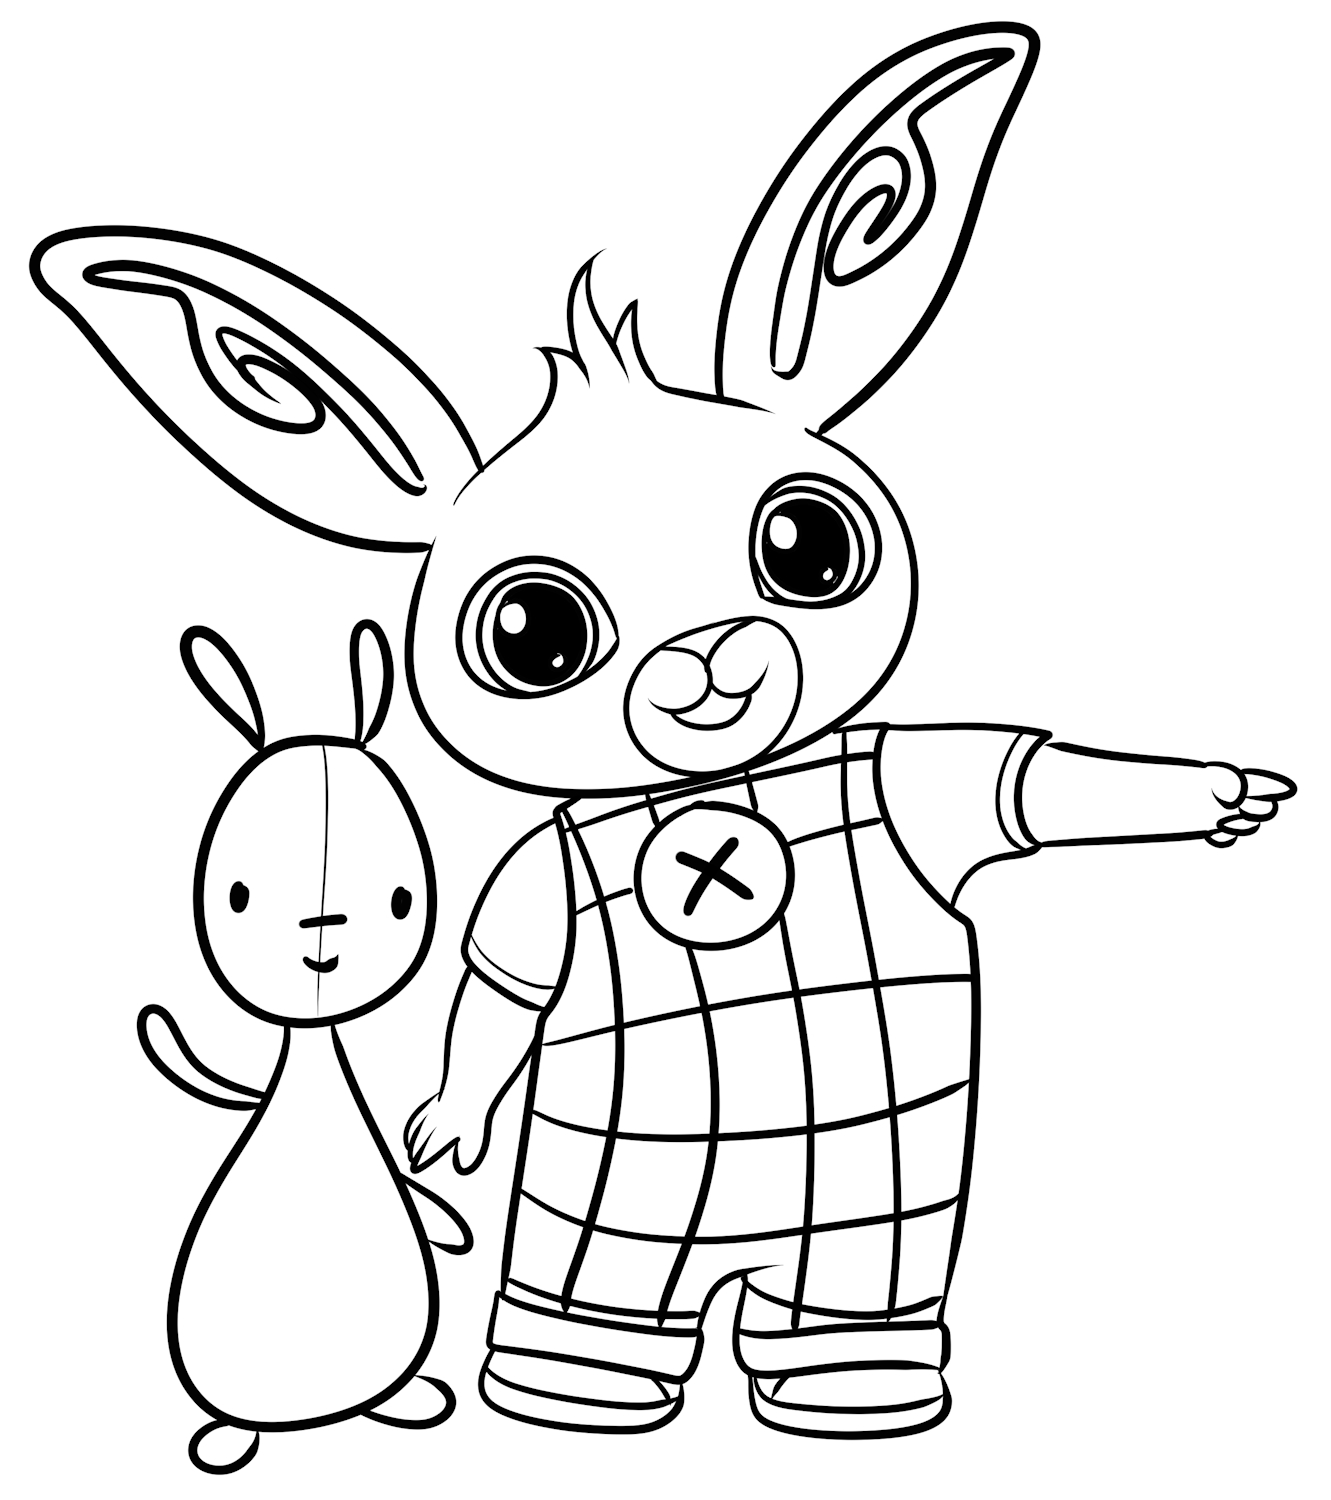 Bing and Flop coloring page to print and color